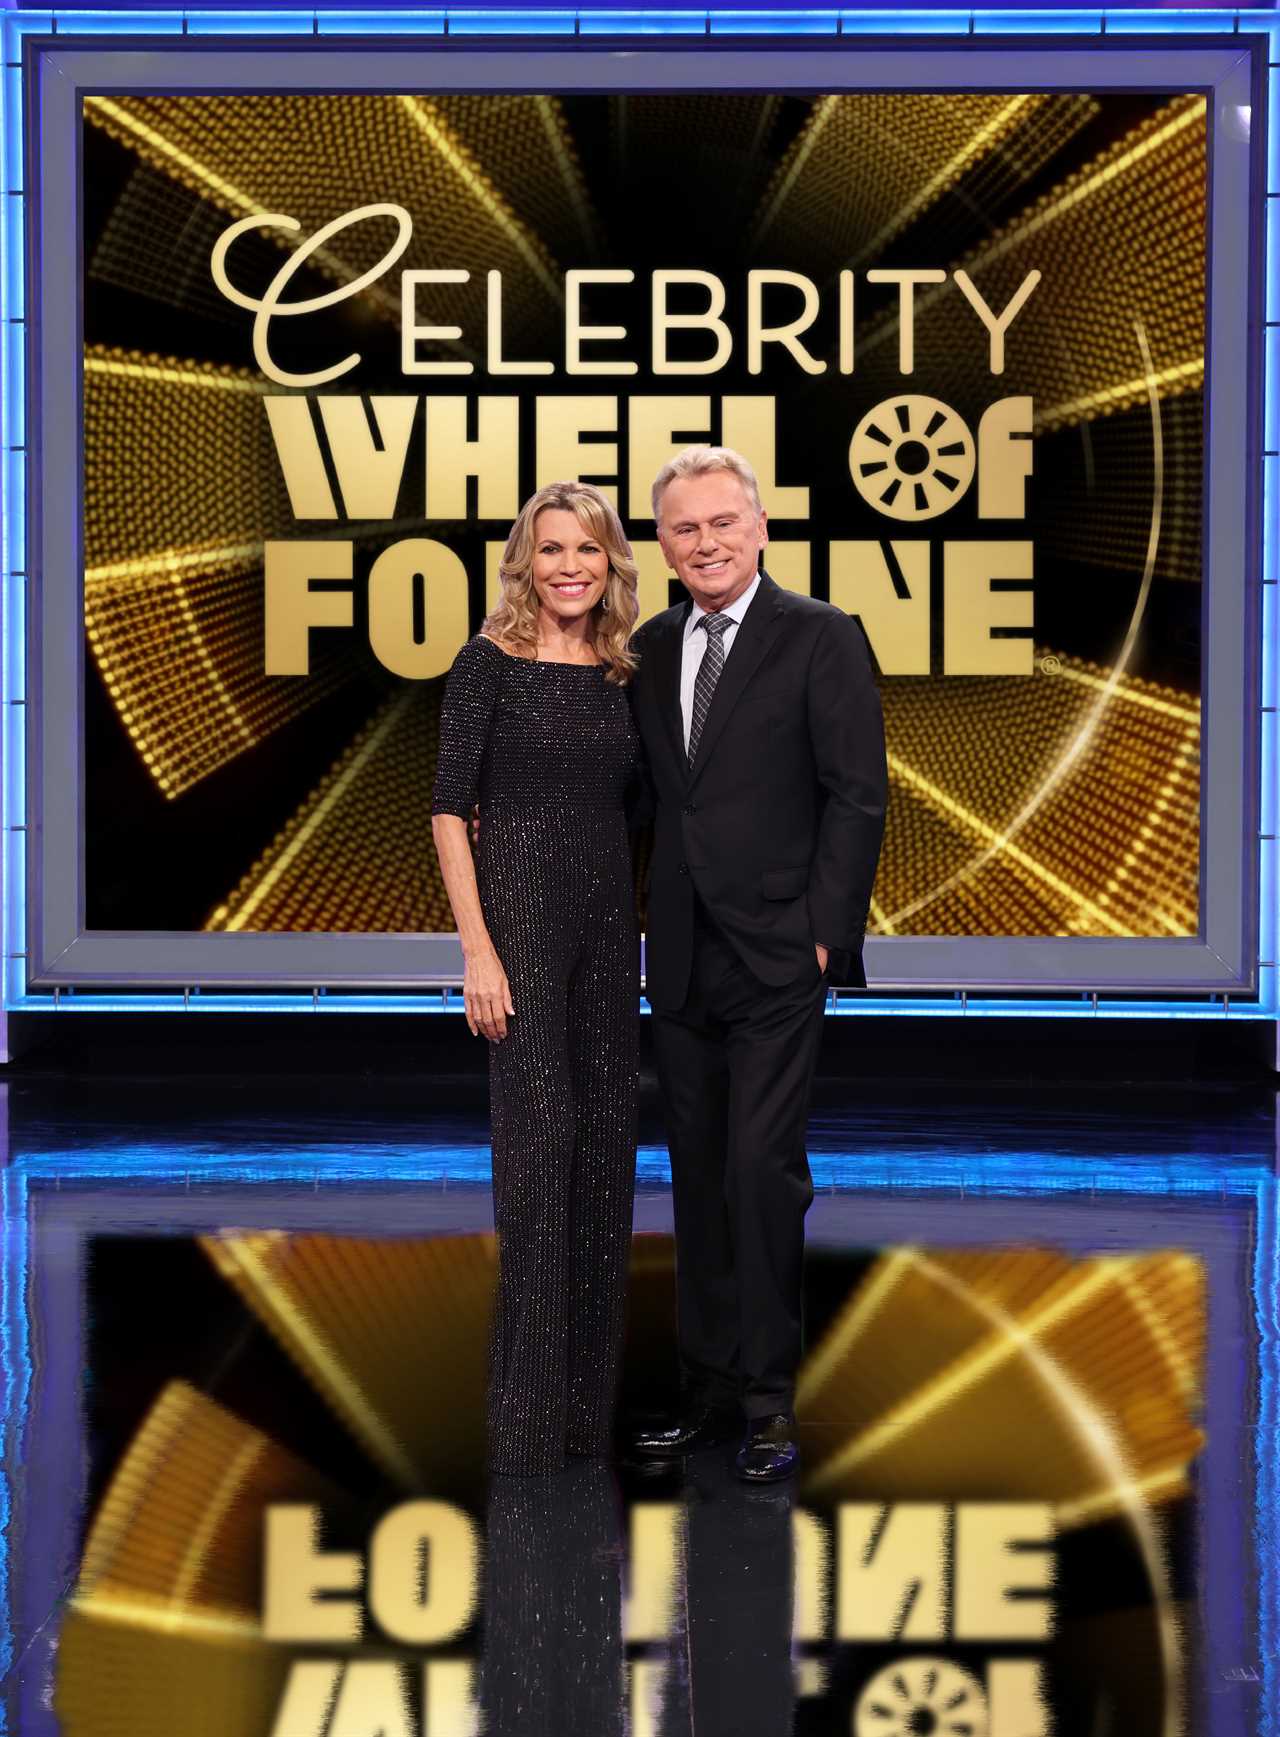 Who are the hosts of Wheel of Fortune?